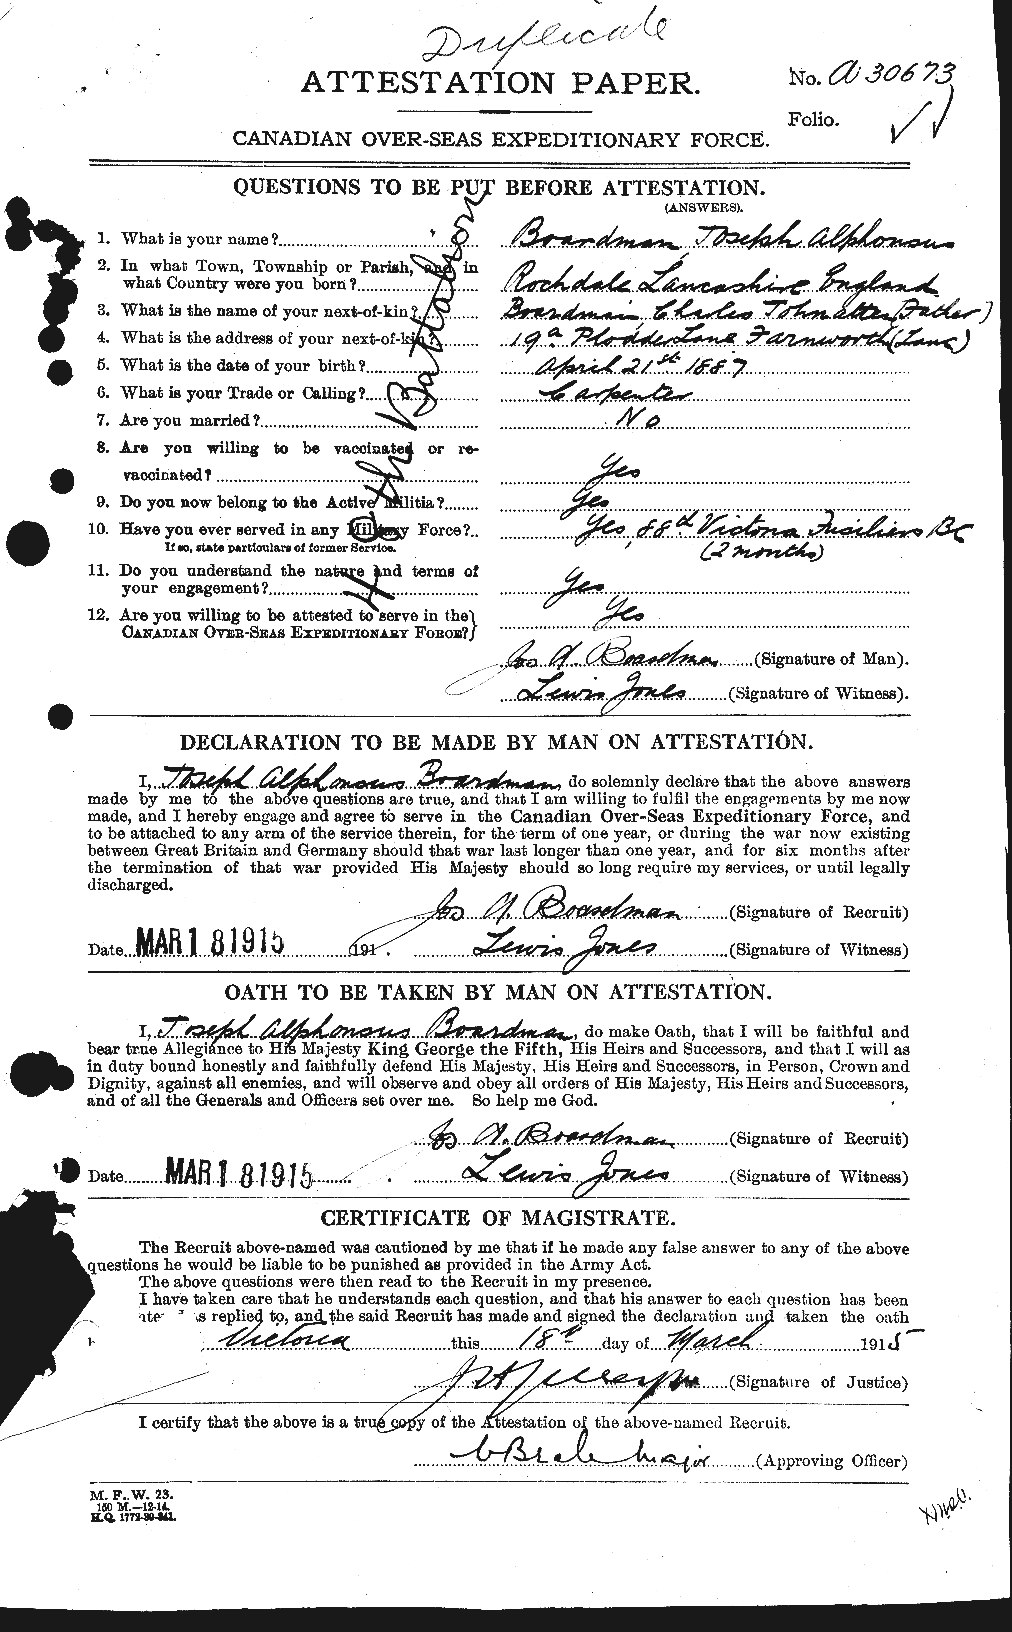 Personnel Records of the First World War - CEF 247259a